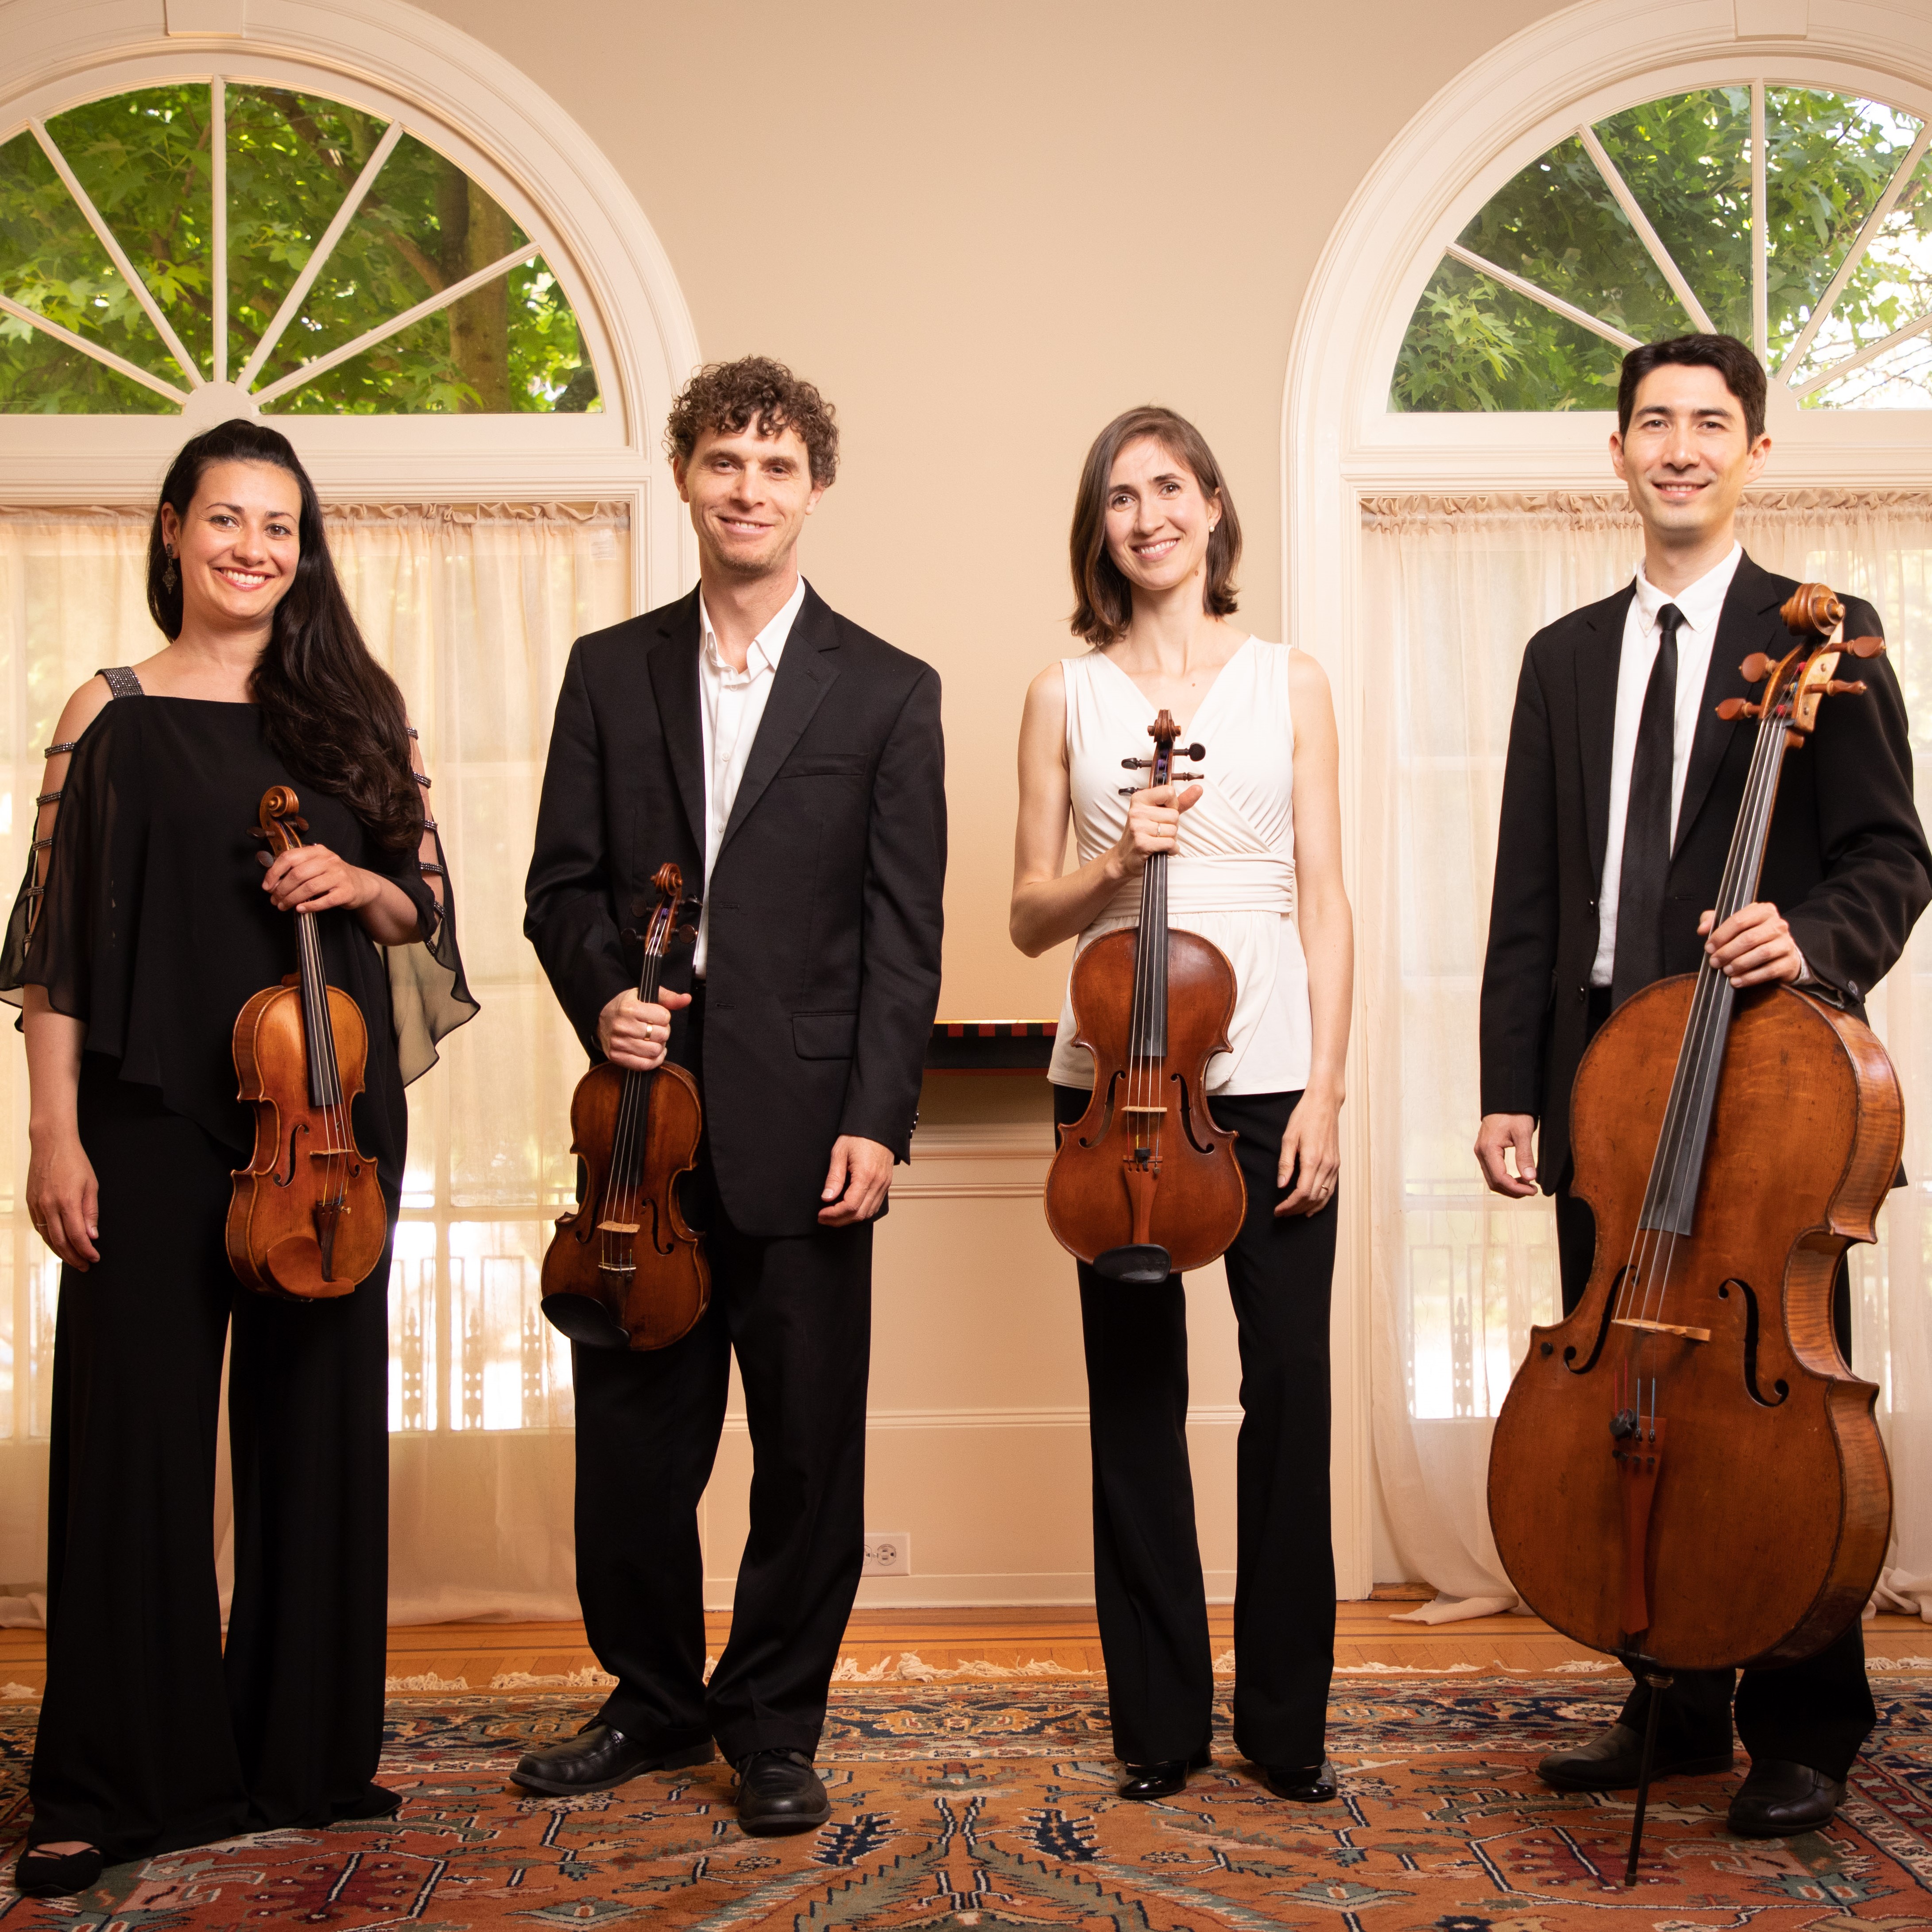 AN EVENING OF CLASSICAL MUSIC WITH THE CHAMBER MUSIC SOCIETY OF SAN FRANCISCO